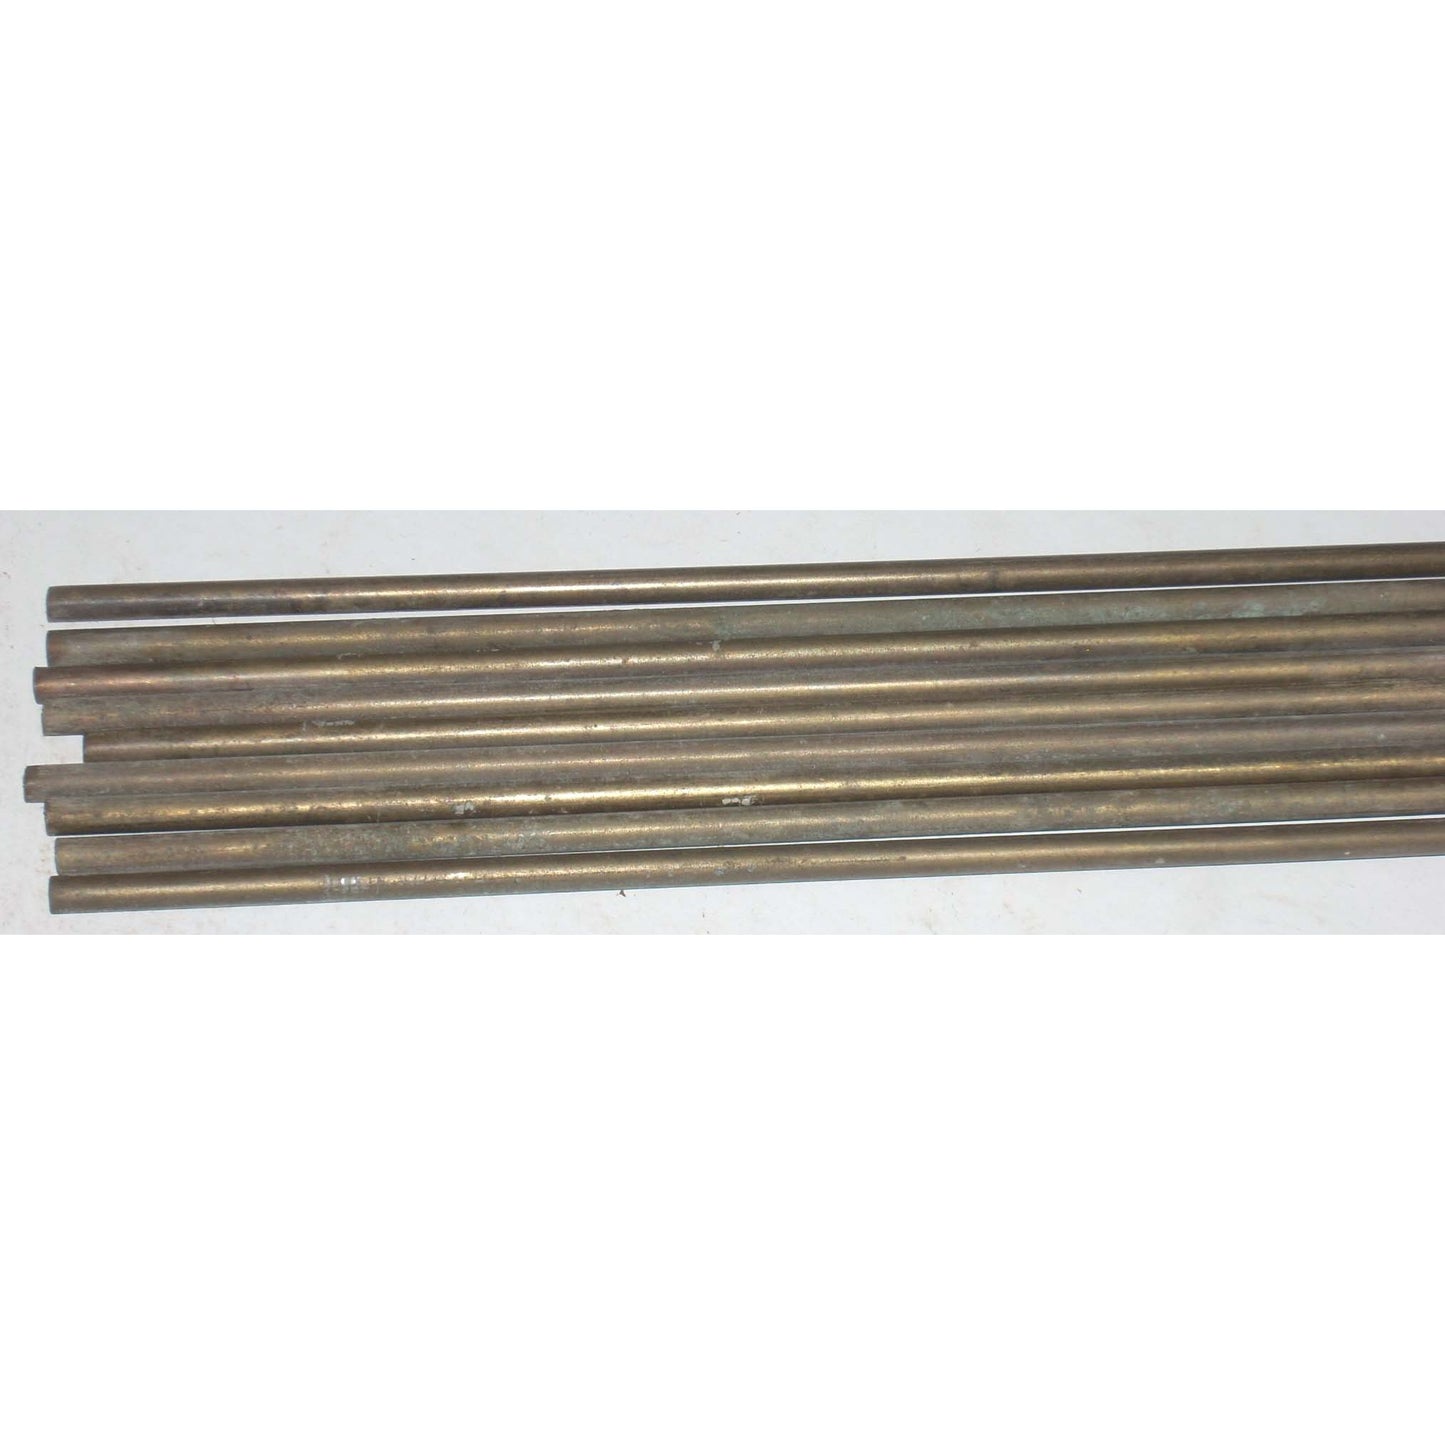 Low Fuming Bronze 3/16 x 36 Brazing Rods 2.67 lbs - Some Oxidation